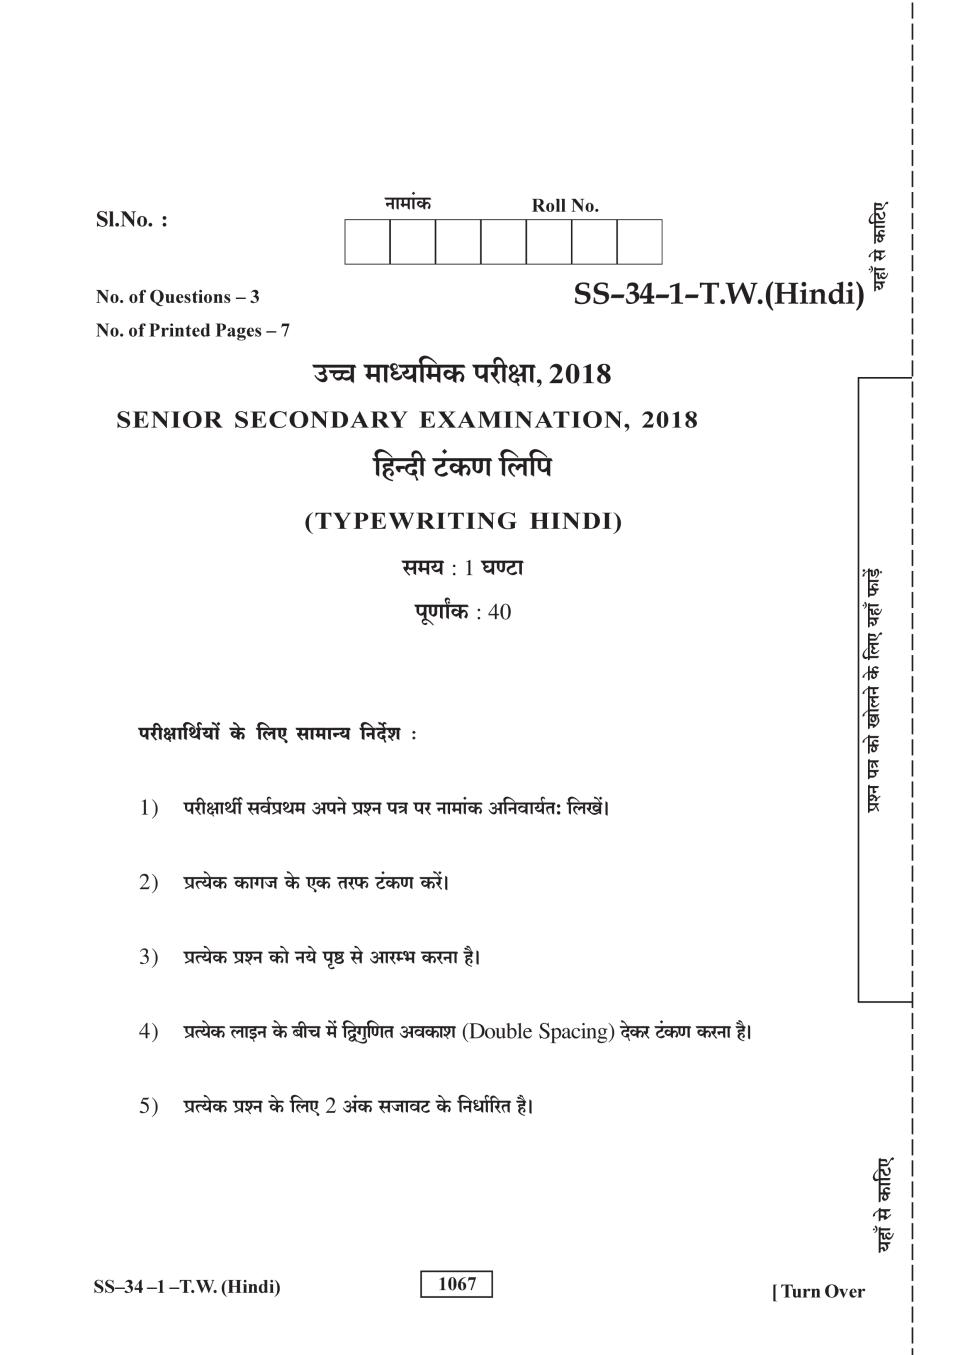 Rajasthan Board 12th Class Typewriting Hindi Question Paper 2018 - Page 1